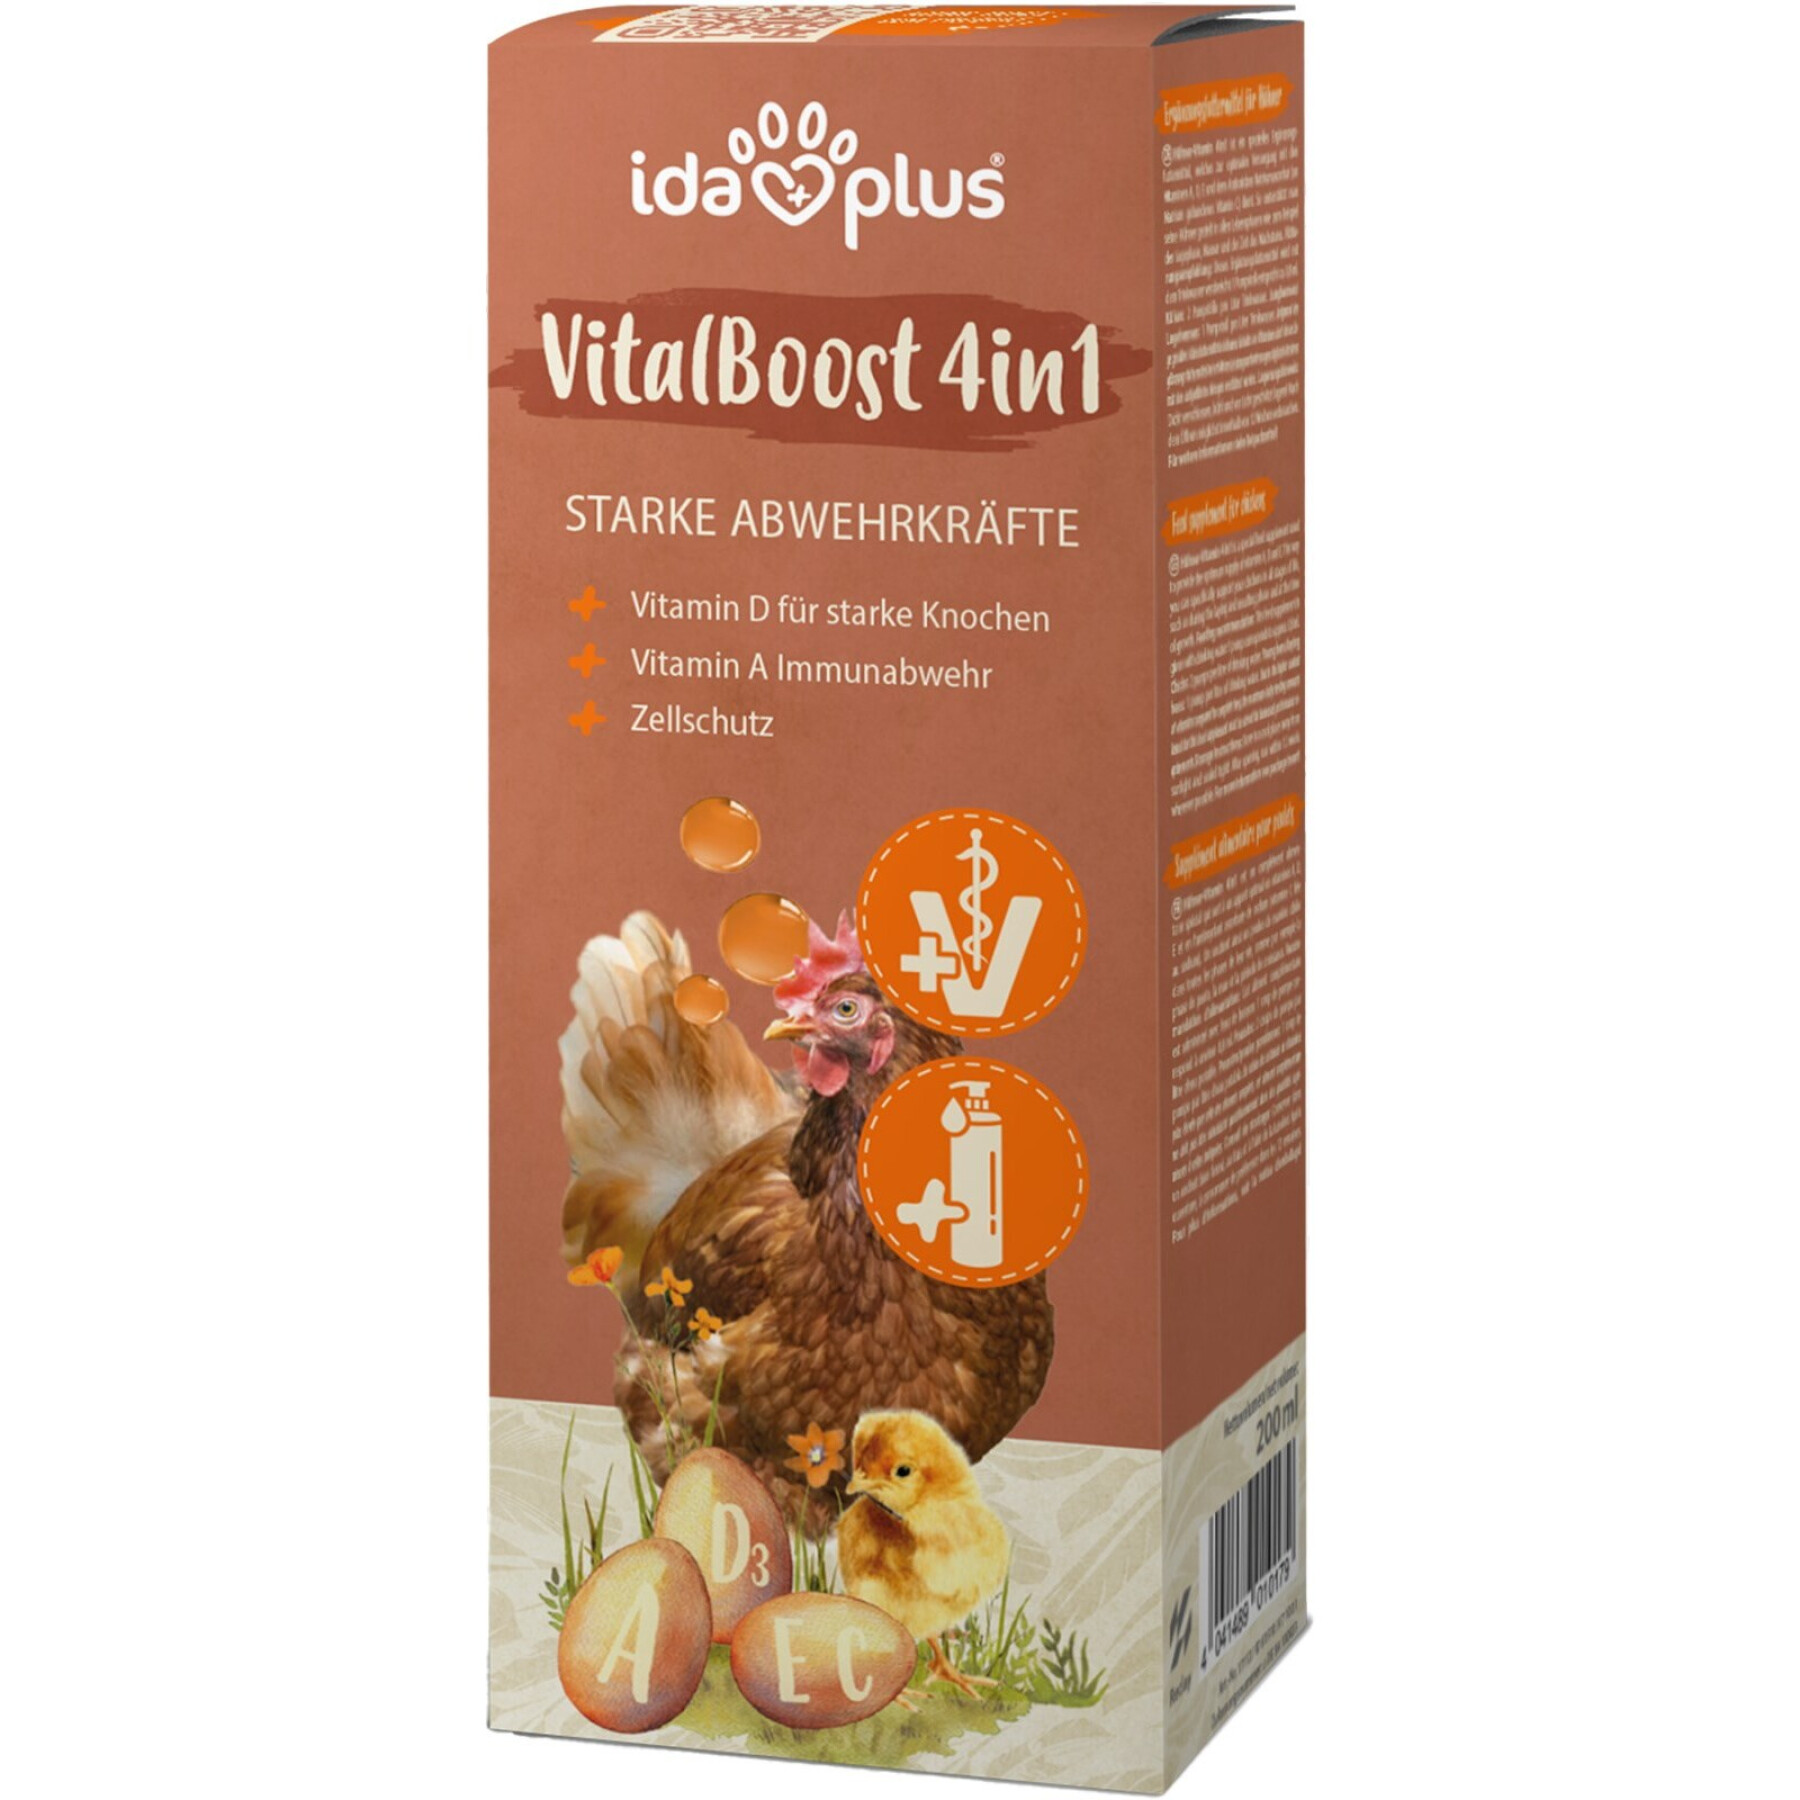 Feed supplement for poultry Ida Plus VitalBoost